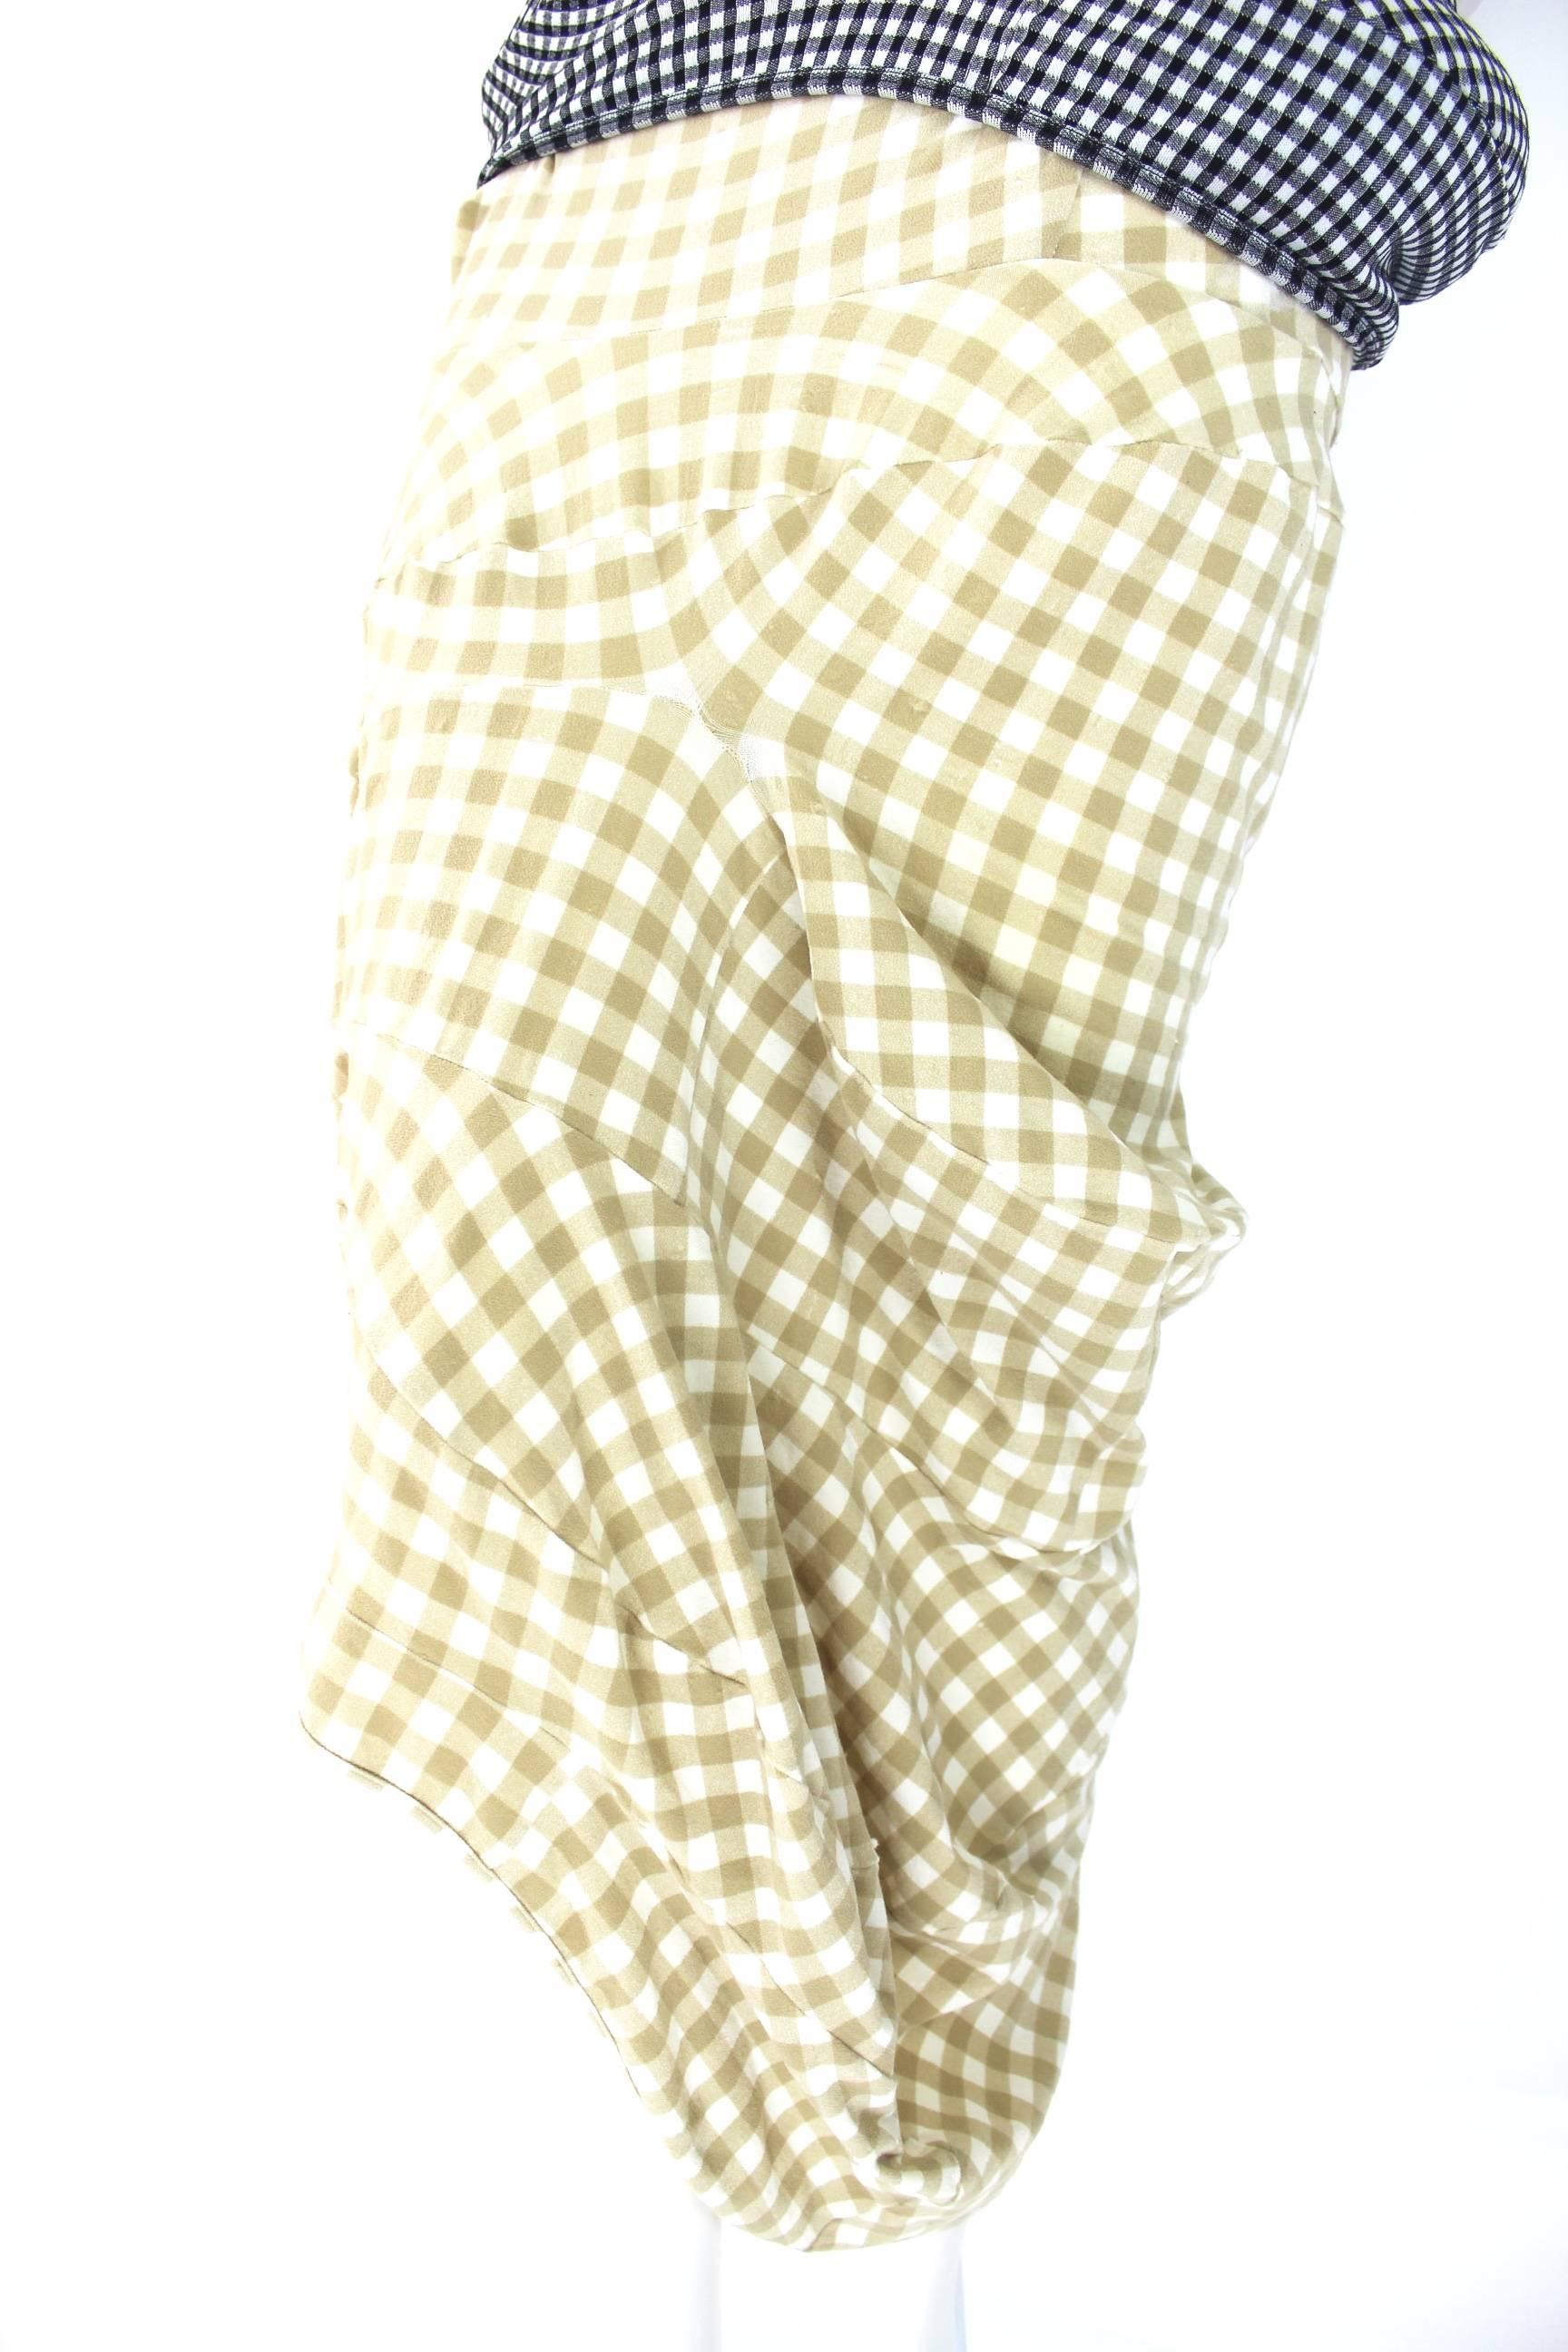 Comme des Garcons AD 1996 'Body Meets Dress' Gingham Skirt 1